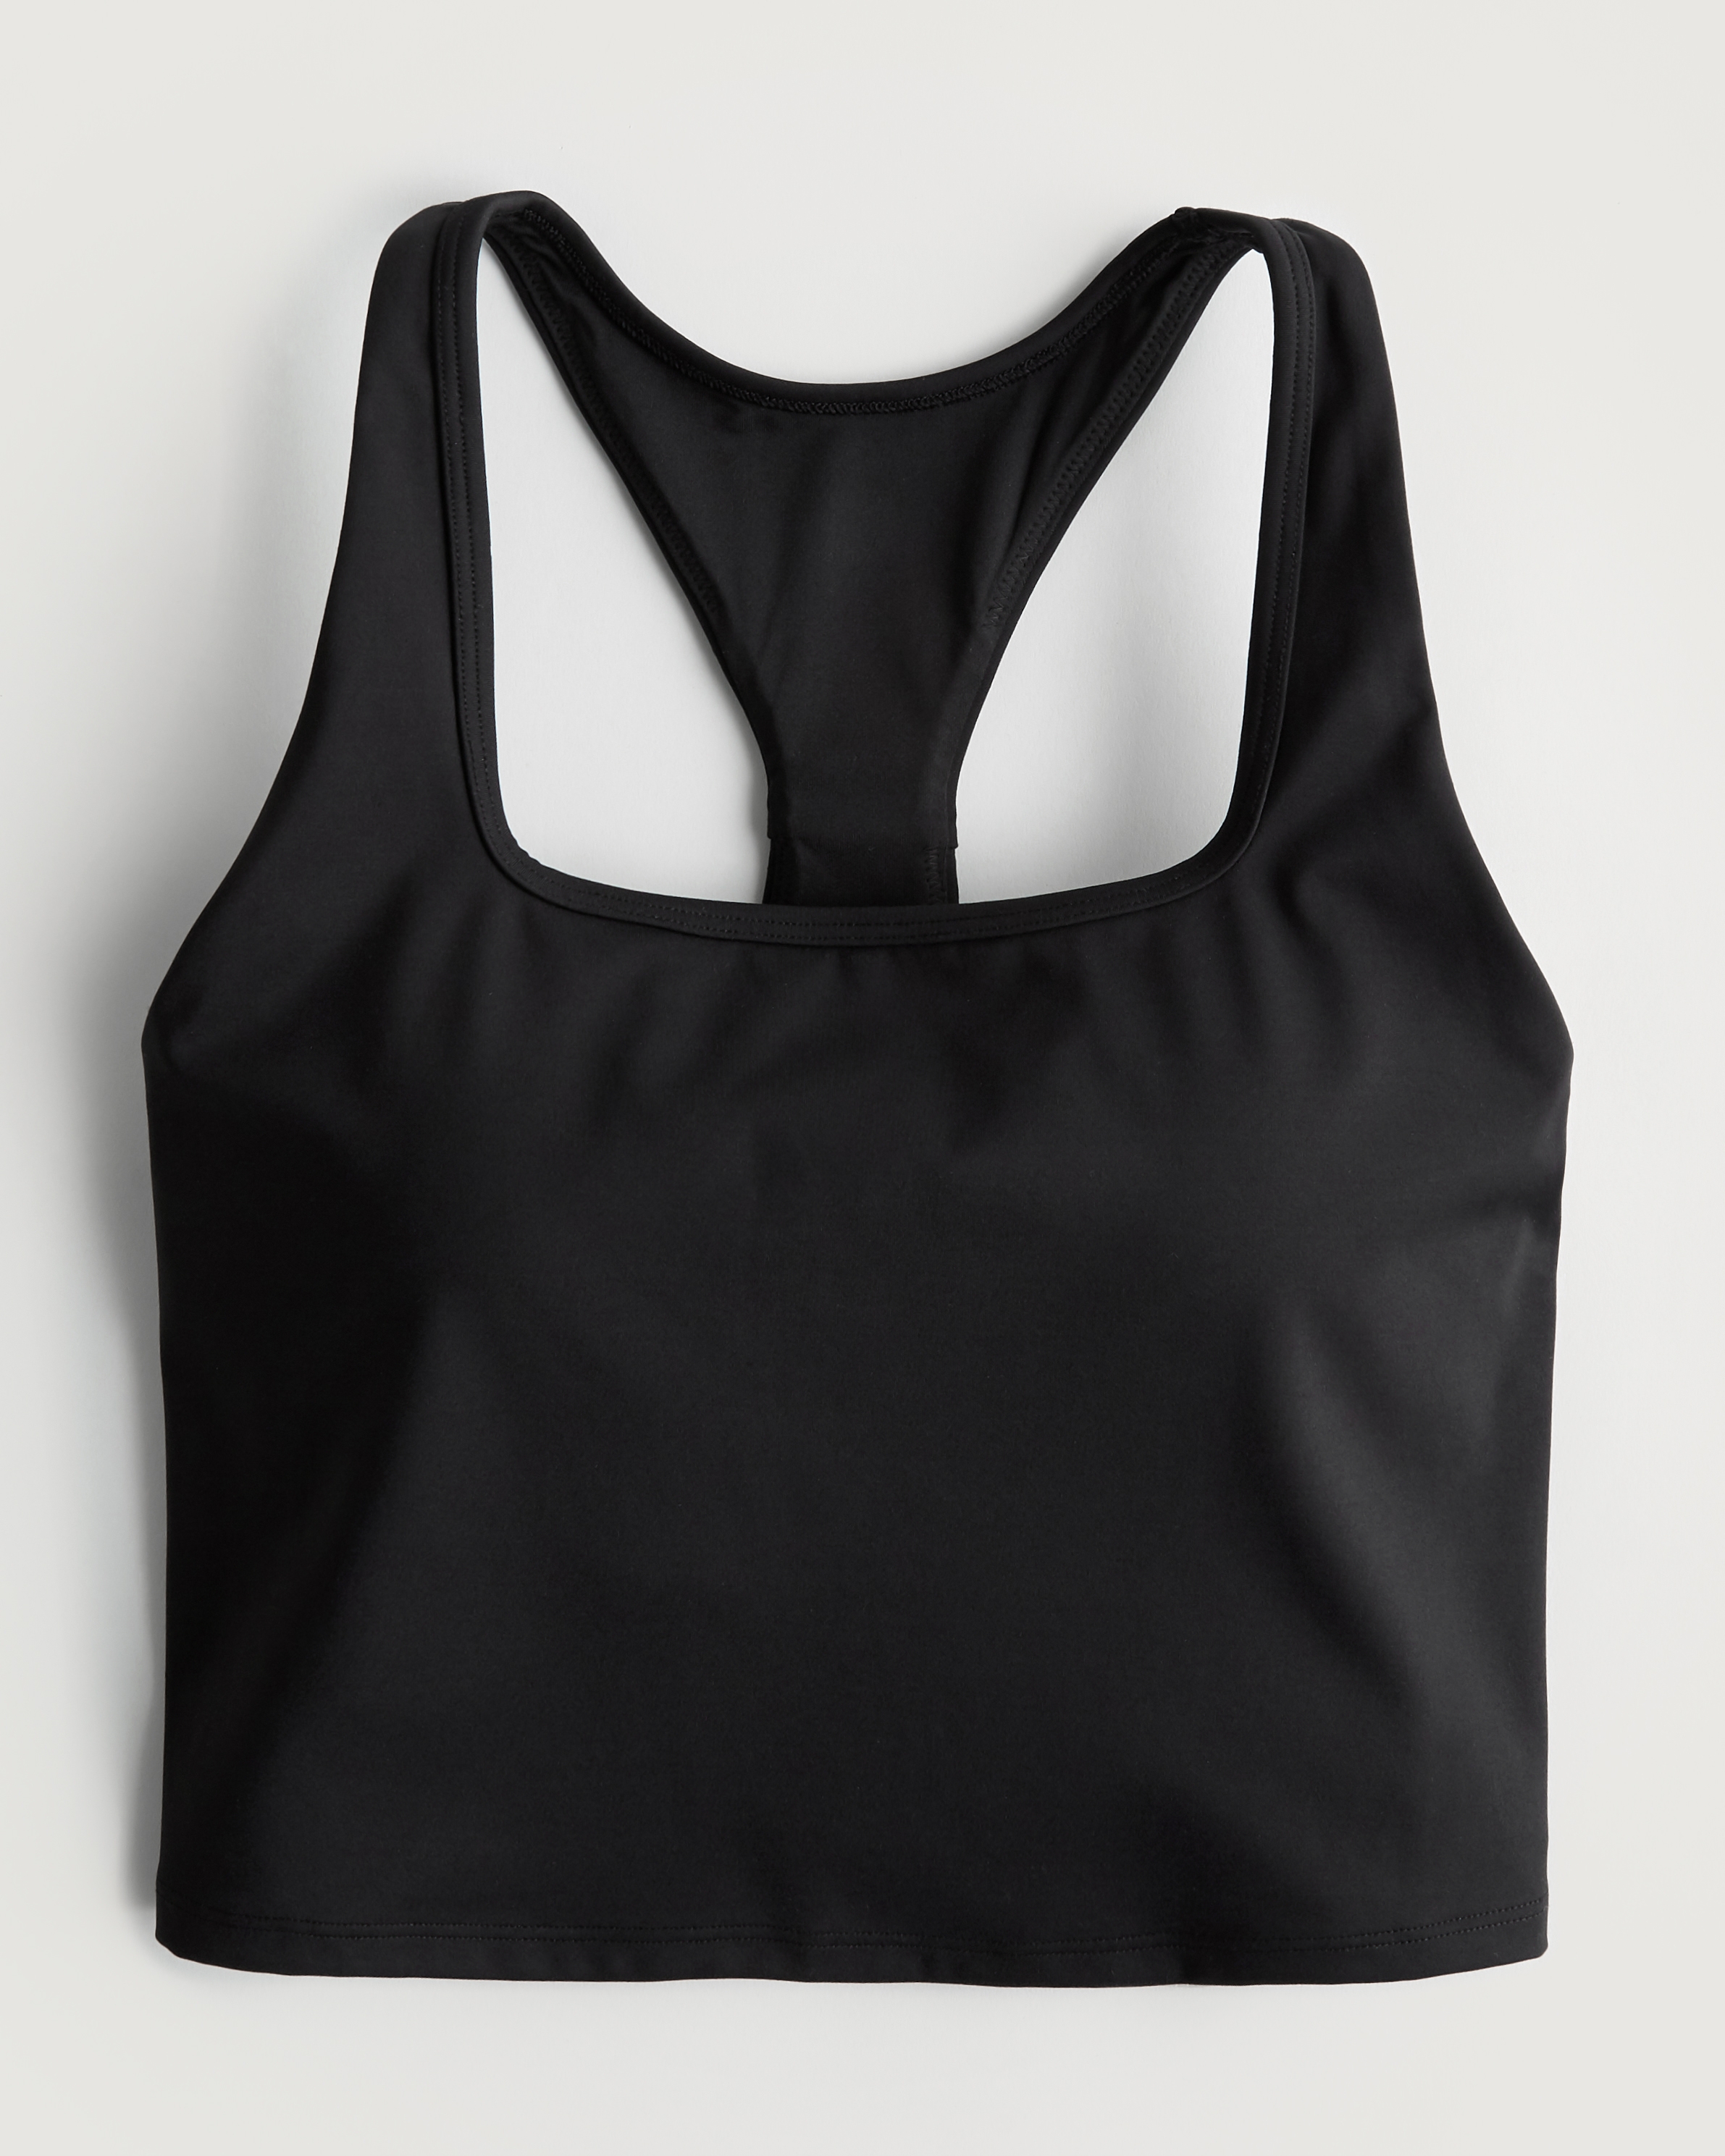 Hollister Gilly Hicks Active Energize Square-Neck Tank